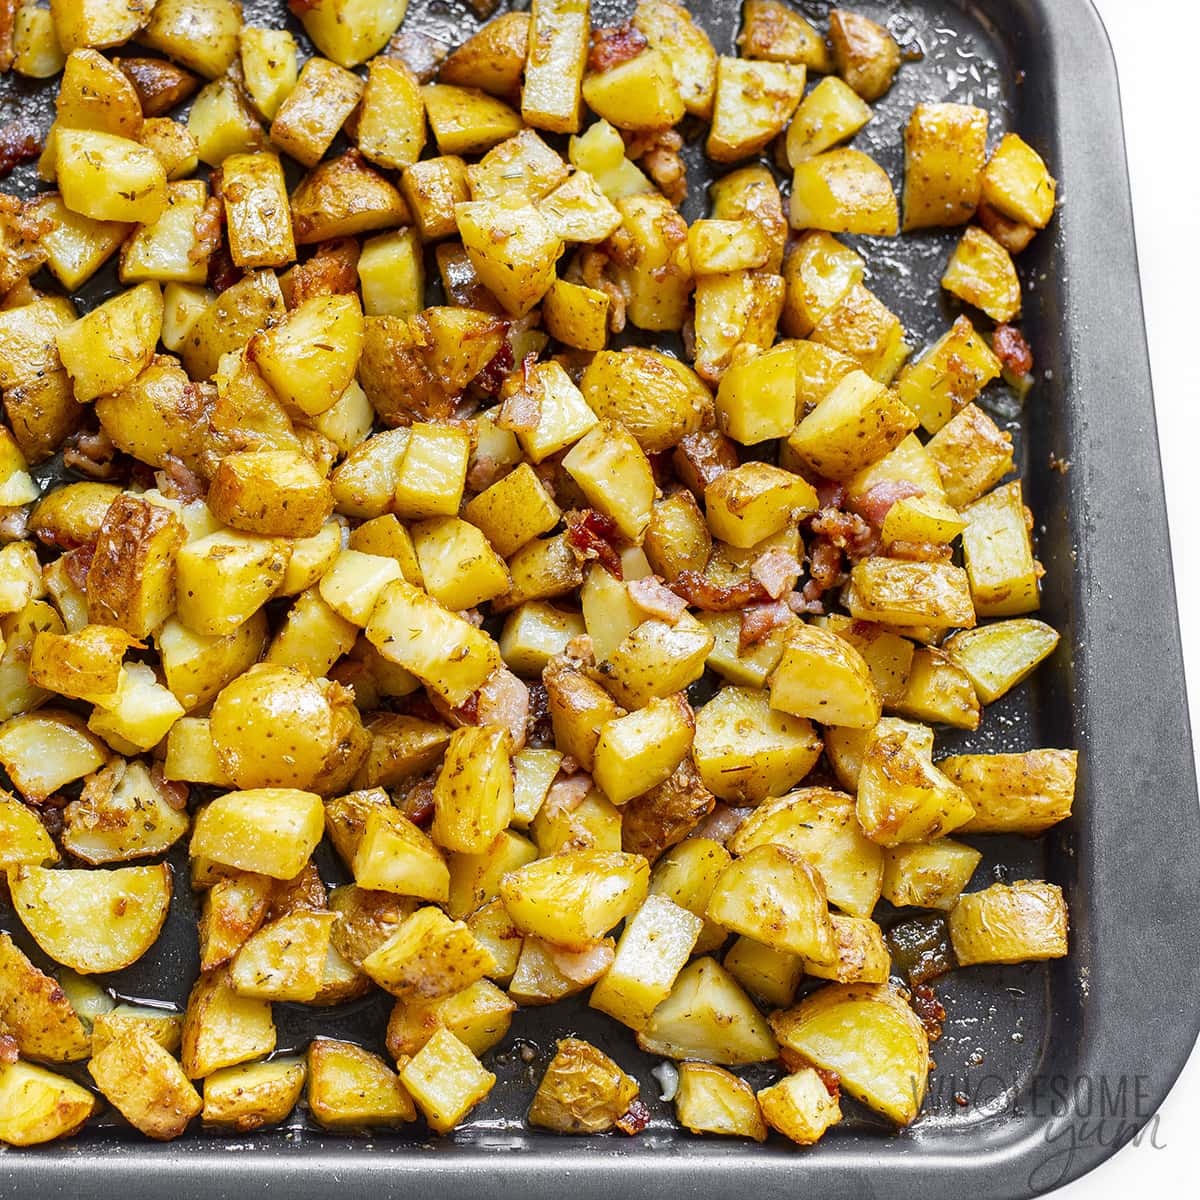 Oven roasted potatoes finished on baking pan.